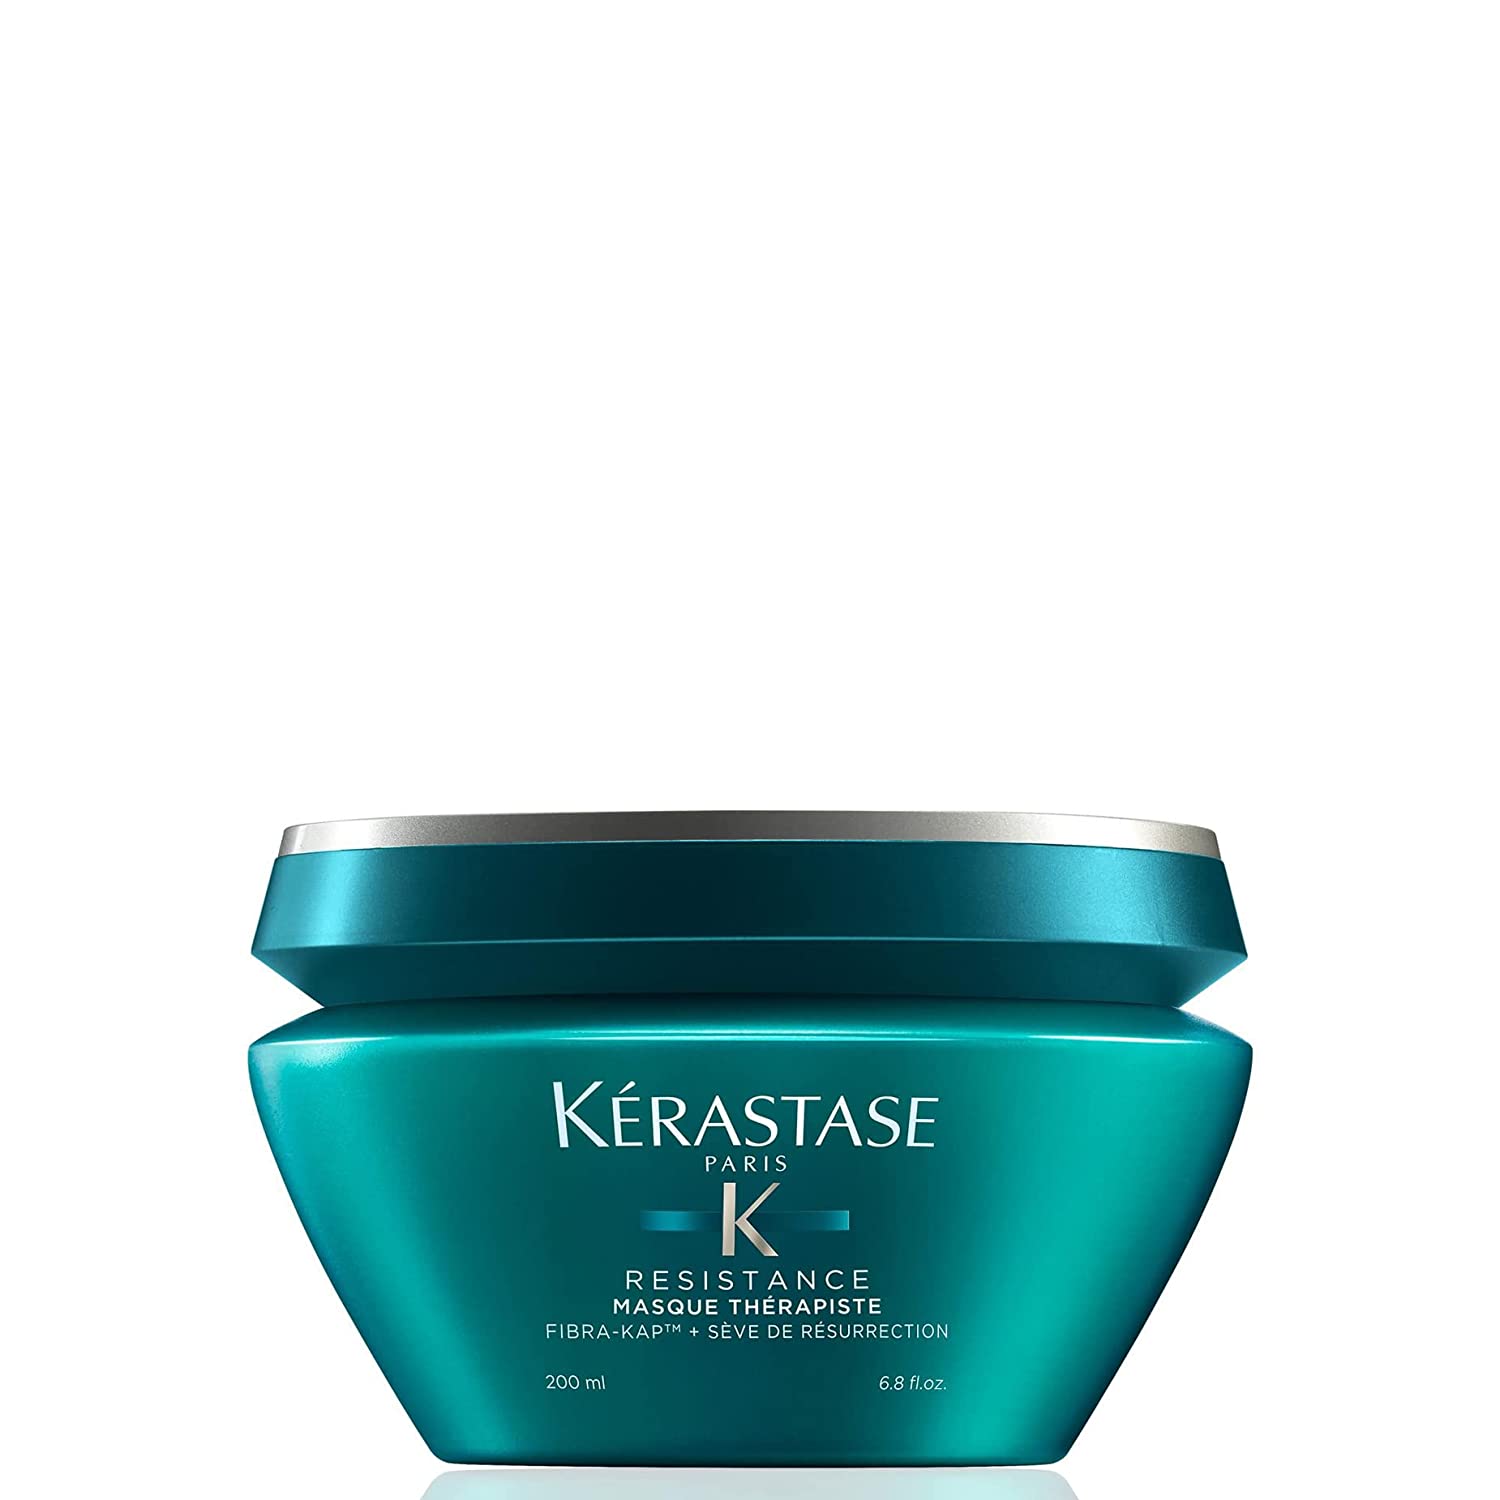 loreal professionnel Kérastase | Hair Mask for Strongly Damaged and Damaged Hair, Regenerating and Repairing, Masque Thérapiste, Resistance, 200 ml